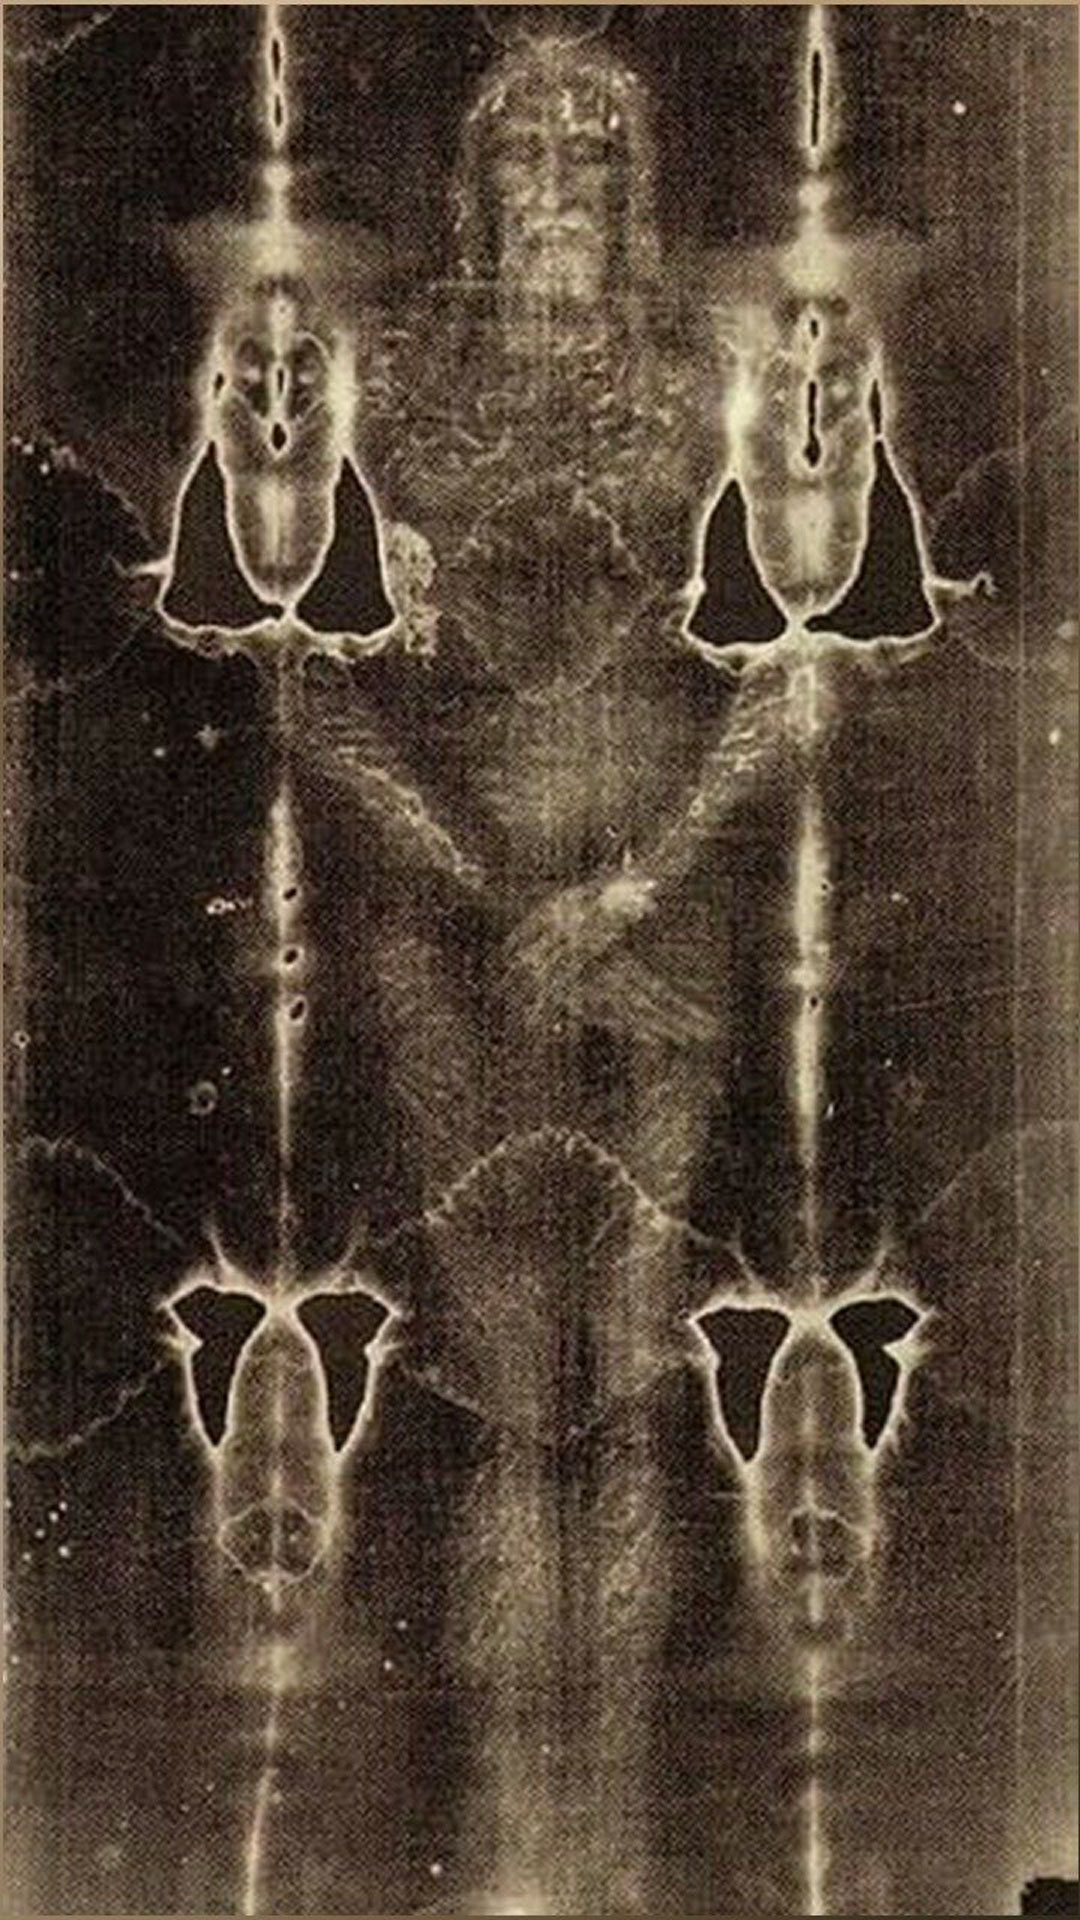 The Shroud of Turin and an x-ray image of Jesus Christ as it was emulsified onto the clothe of the shroud.